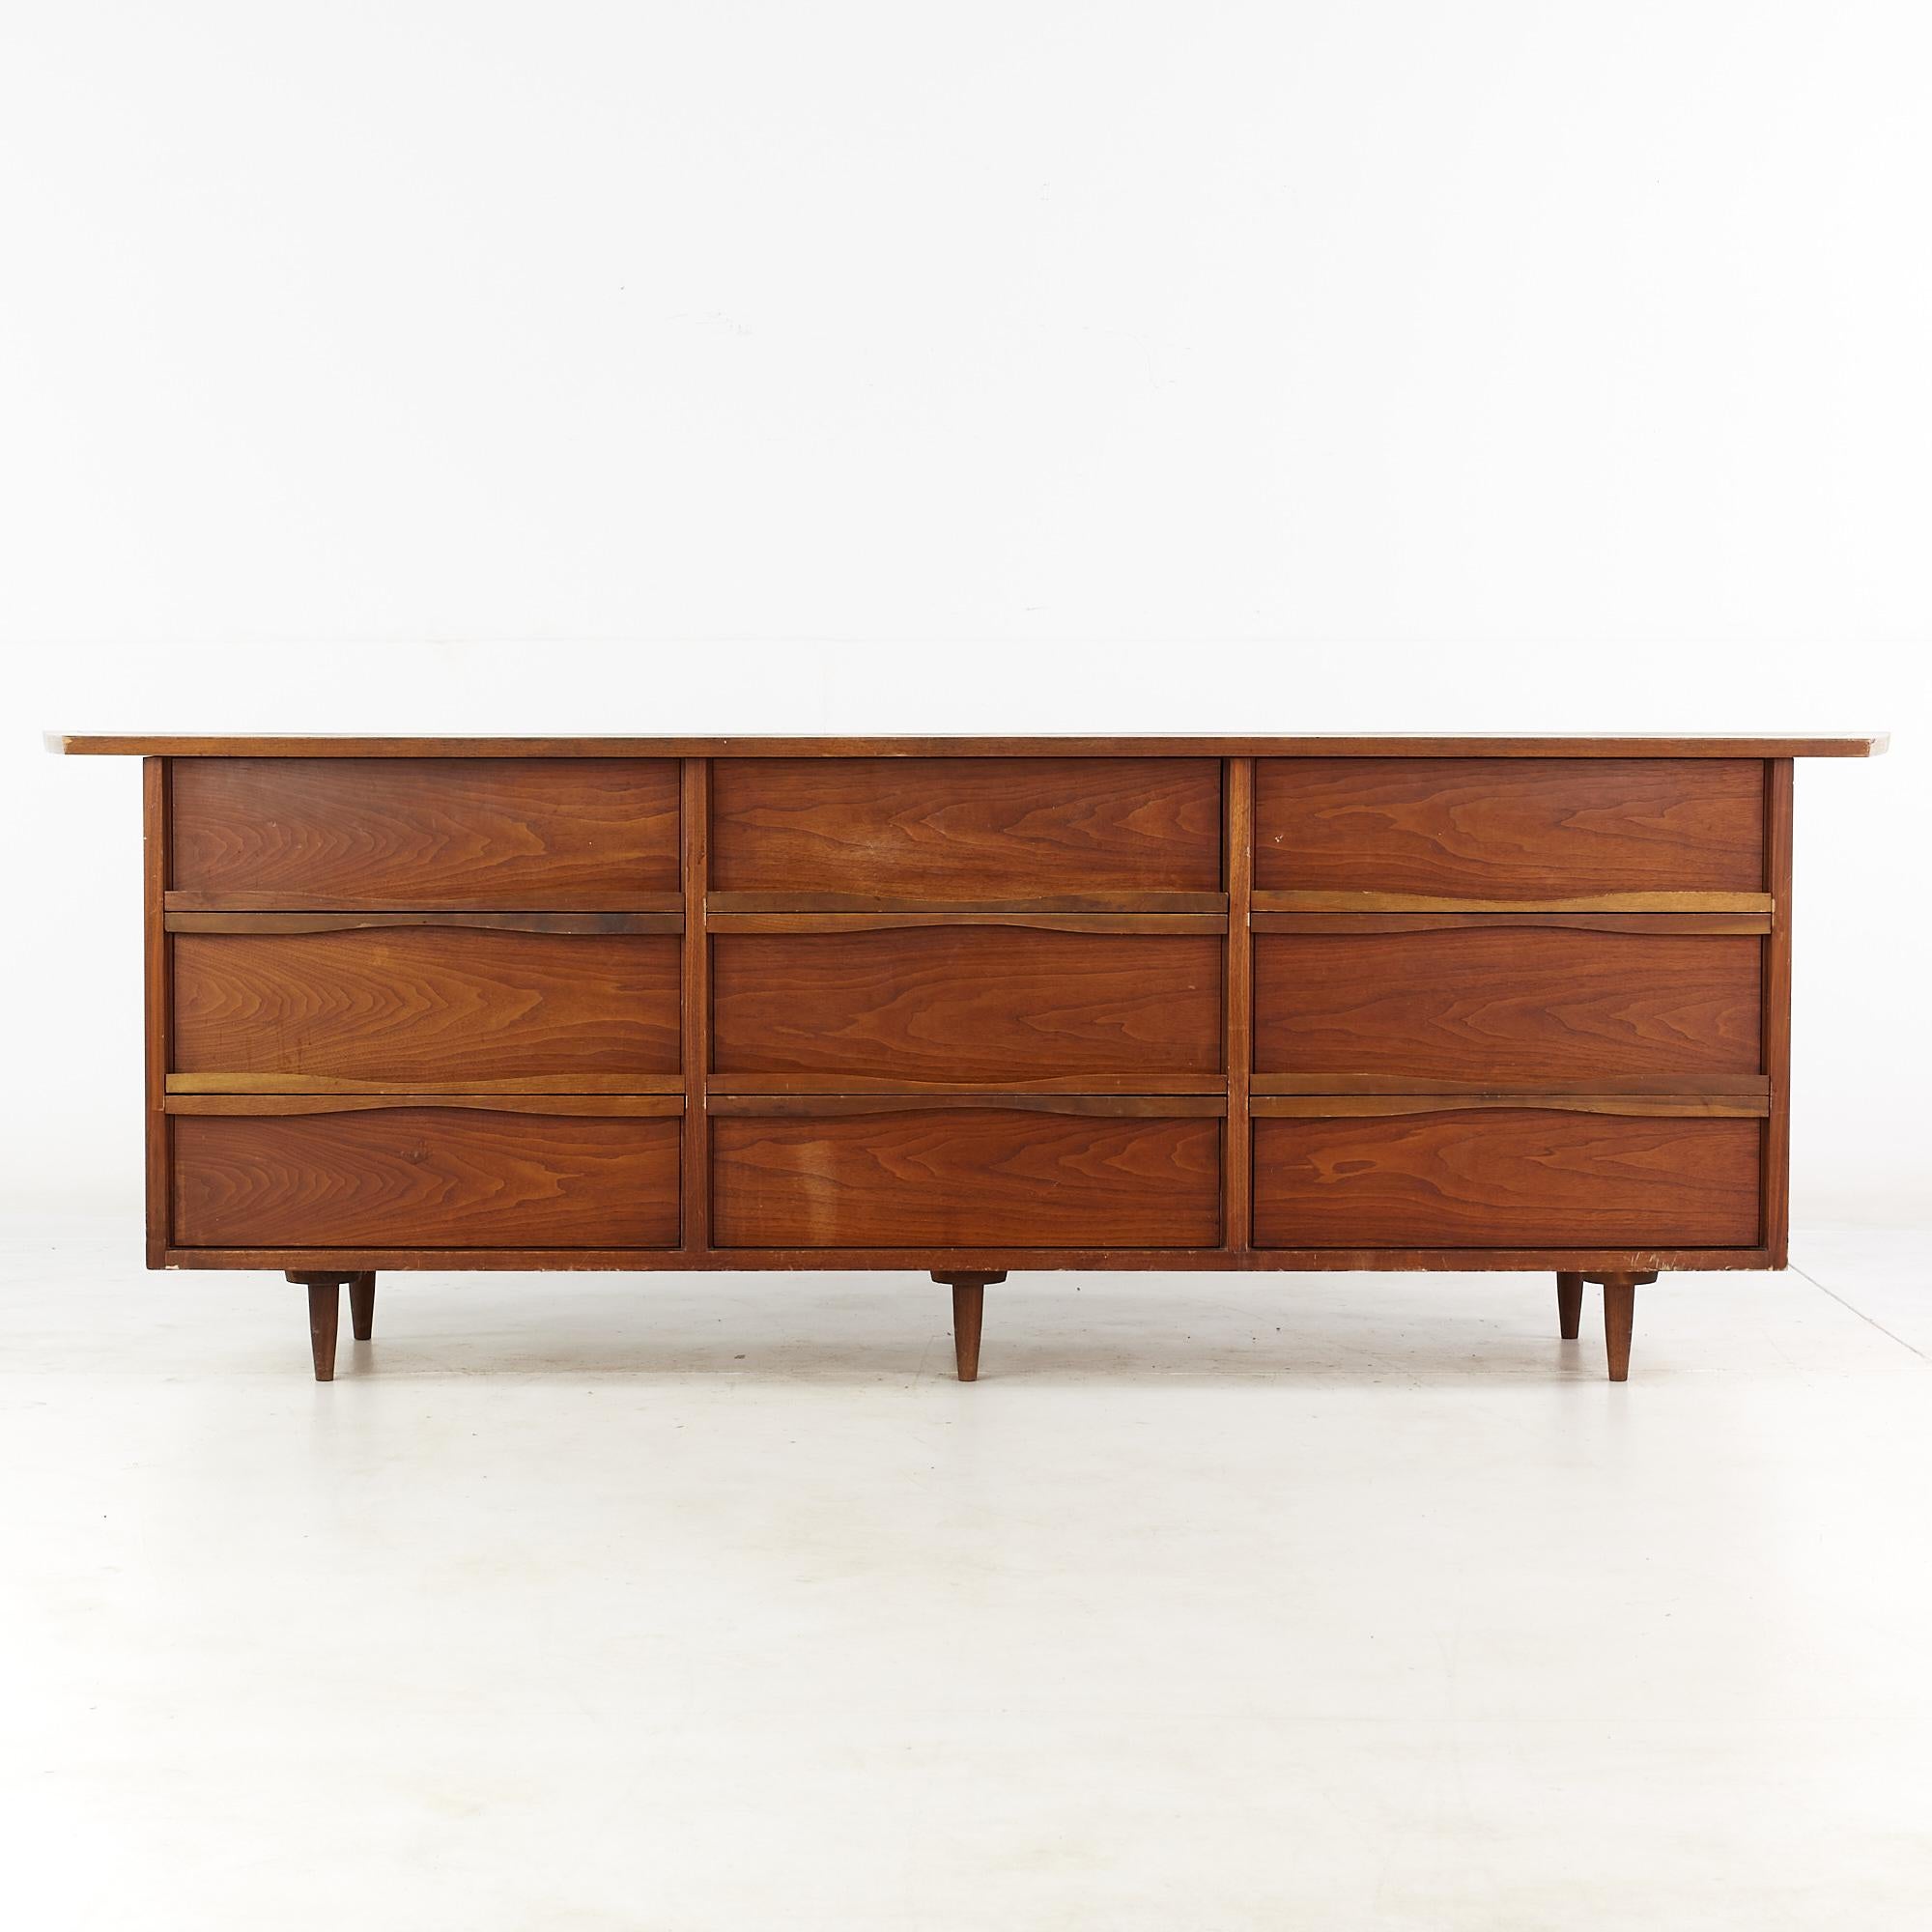 George Nakashima for Widdicomb mid century walnut 9 drawer lowboy dresser

This lowboy dresser measures: 98 wide x 22.5 deep x 32 inches high

All pieces of furniture can be had in what we call restored vintage condition. That means the piece is